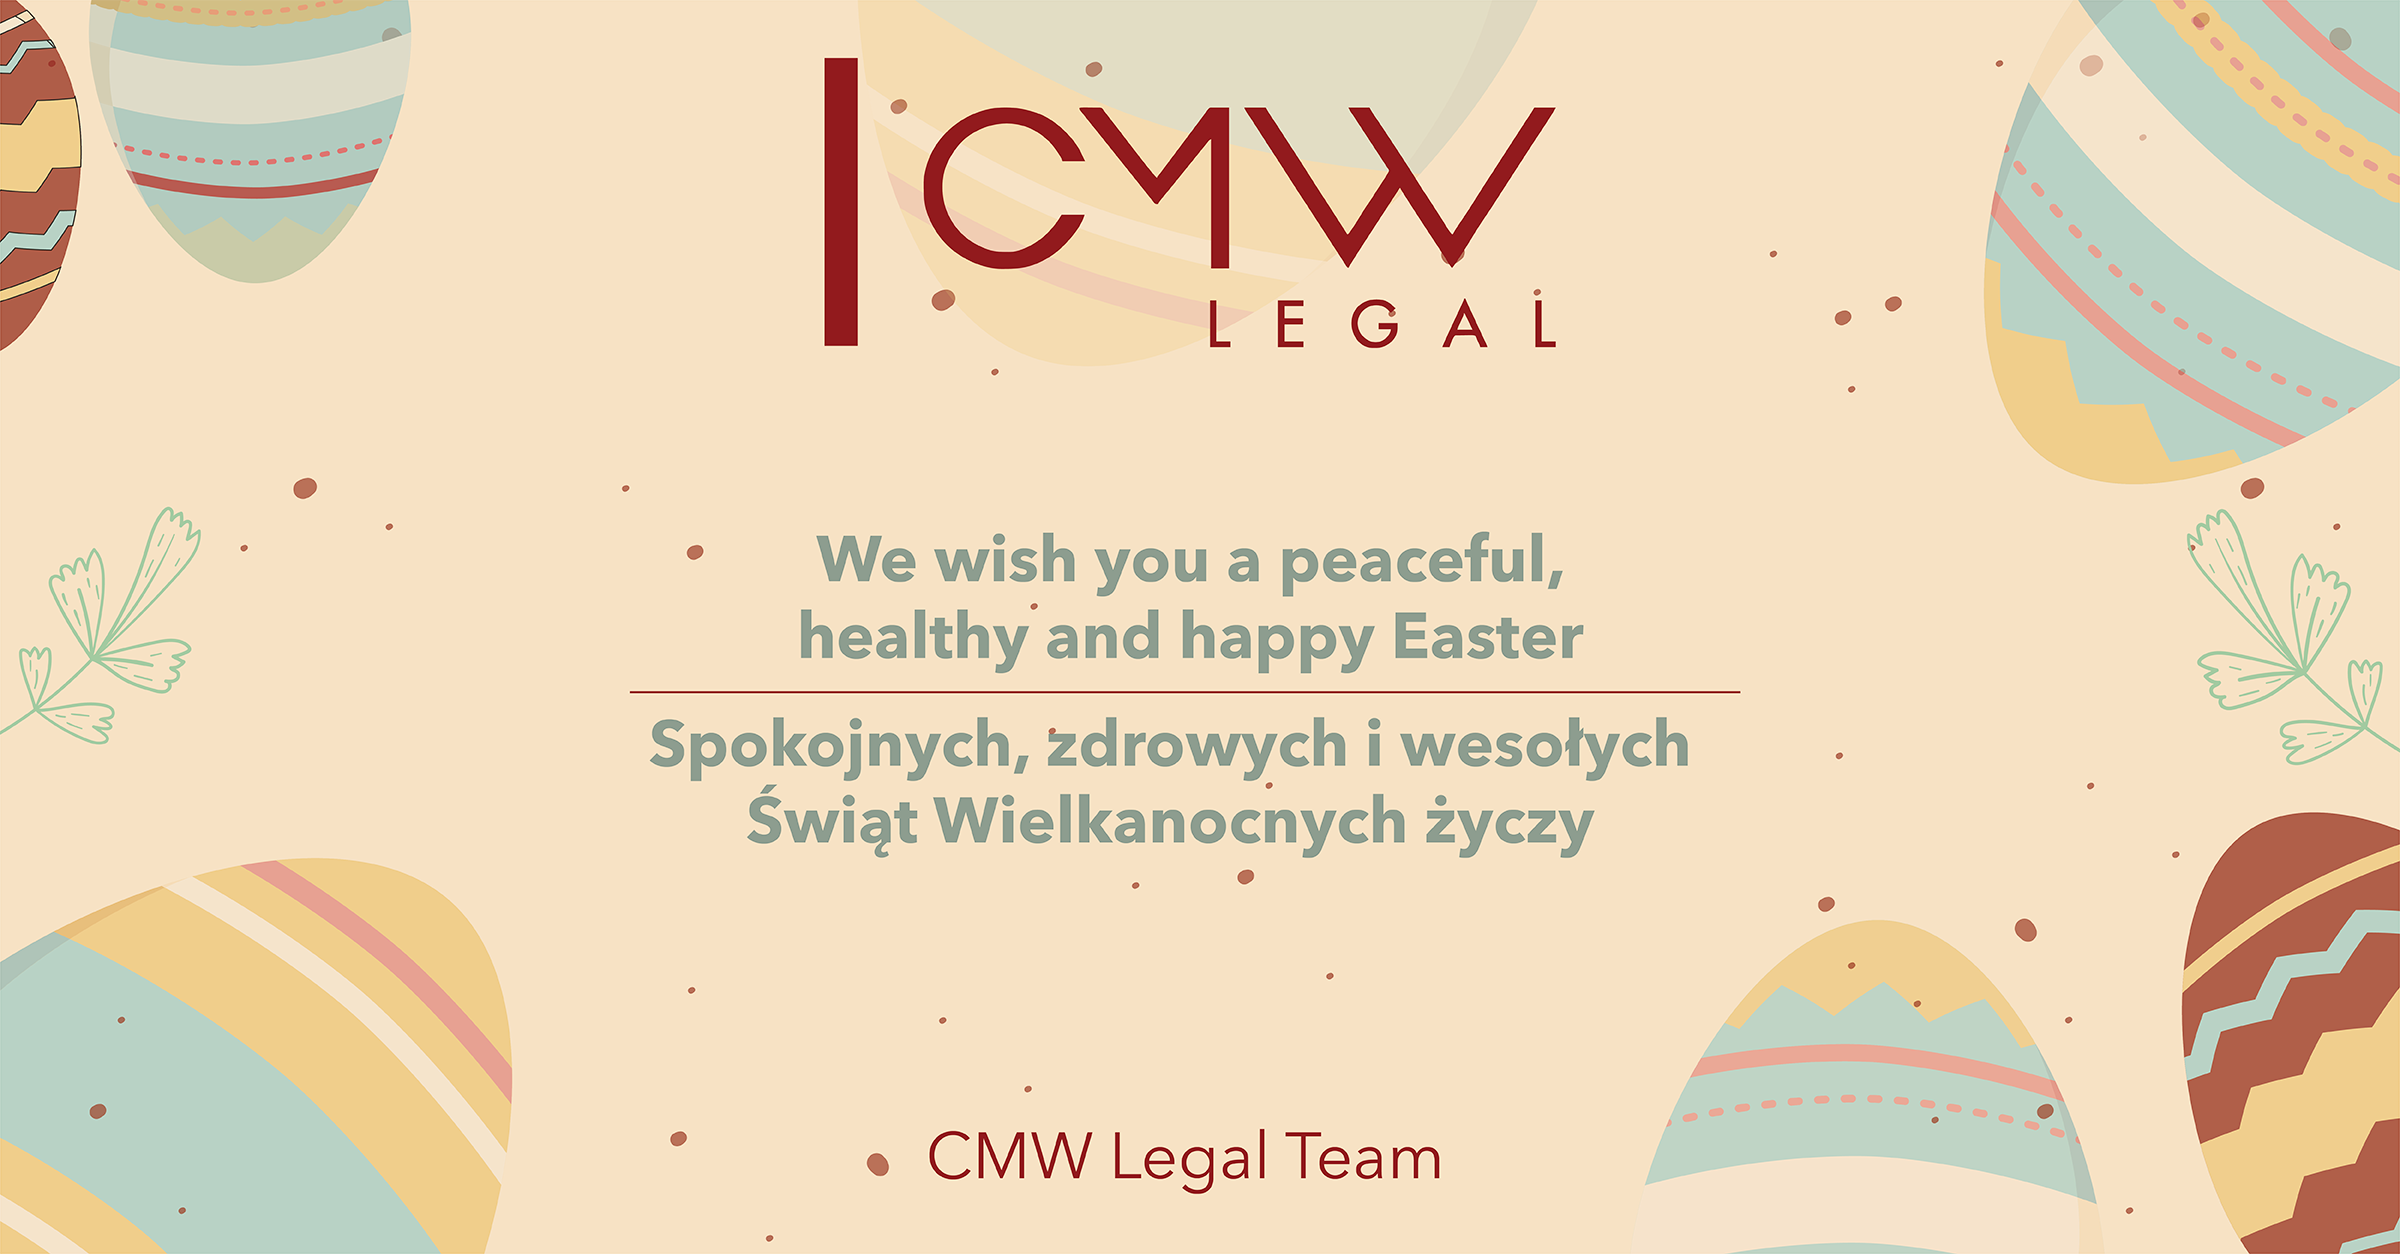  We wish you Happy Easter!